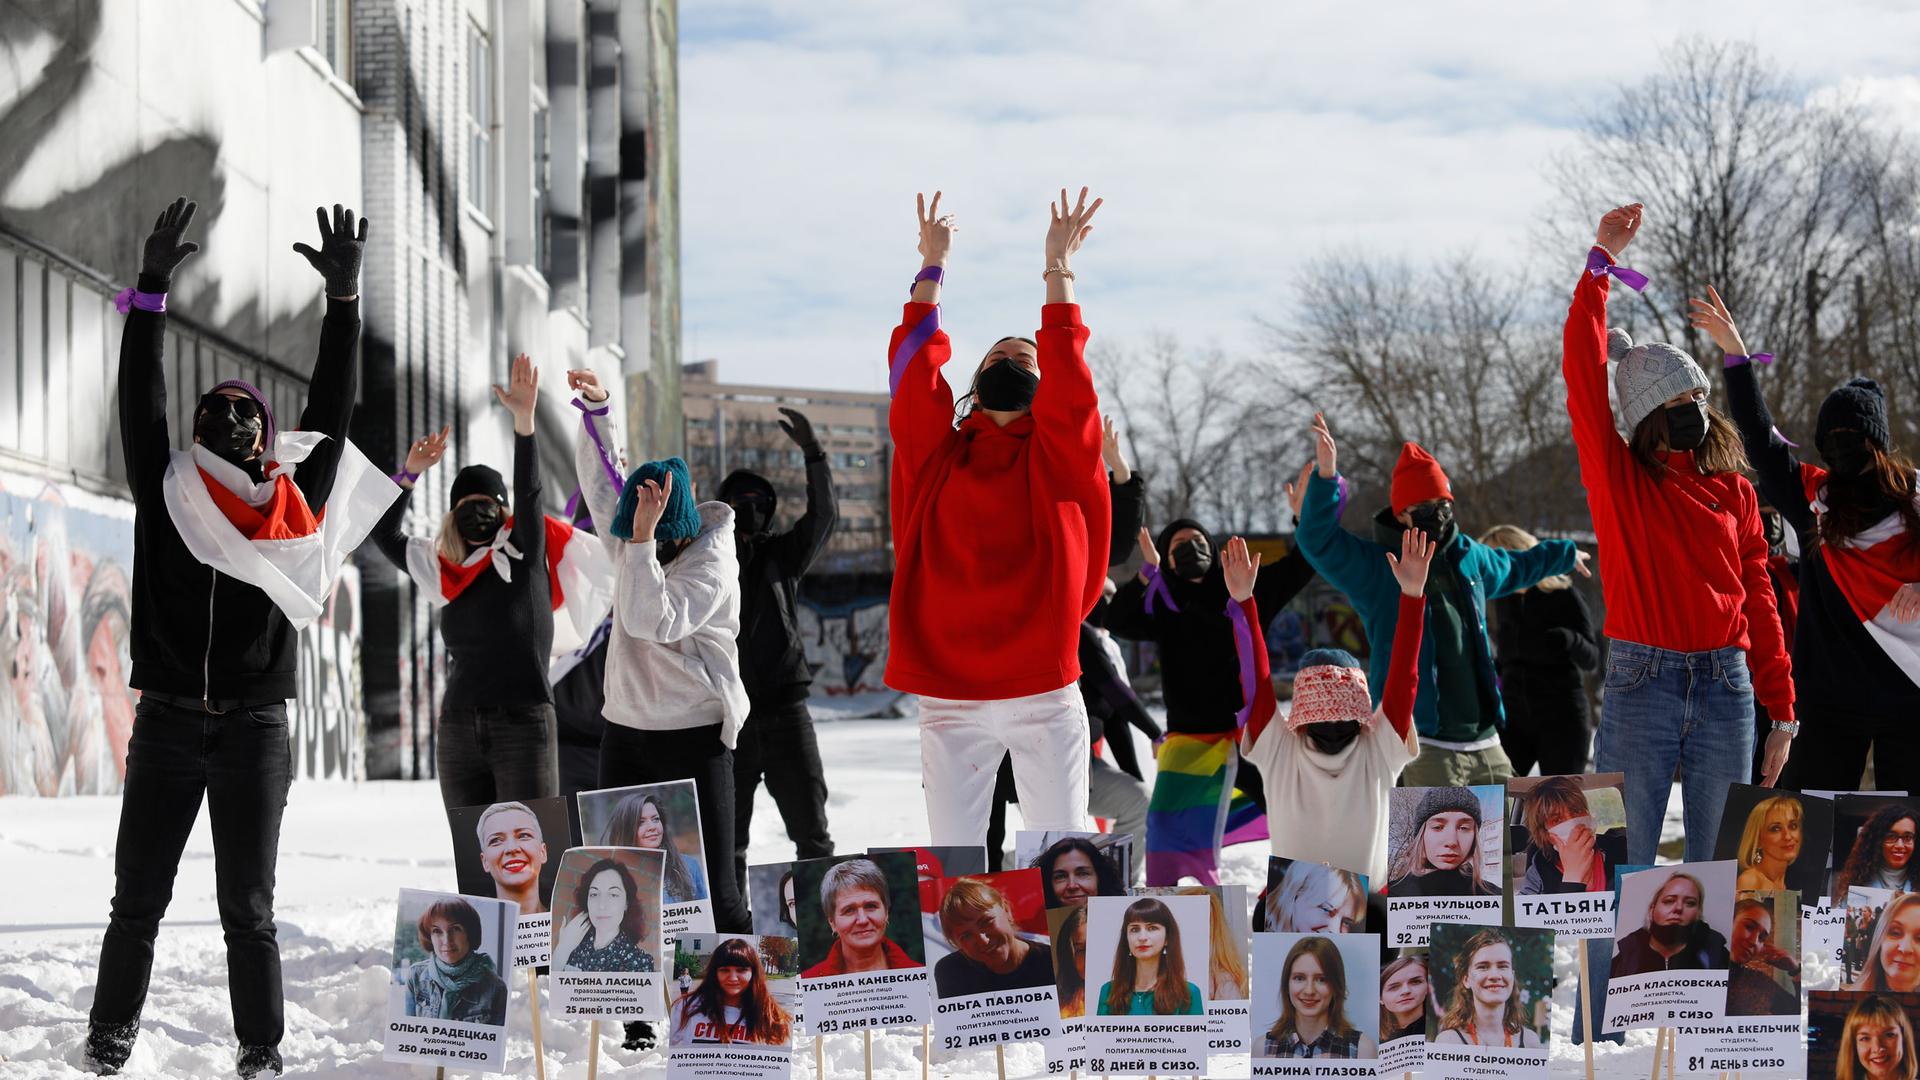 A group of women, several wearing red, are shown with their hands in the air and with dozens of photographs in front of them.